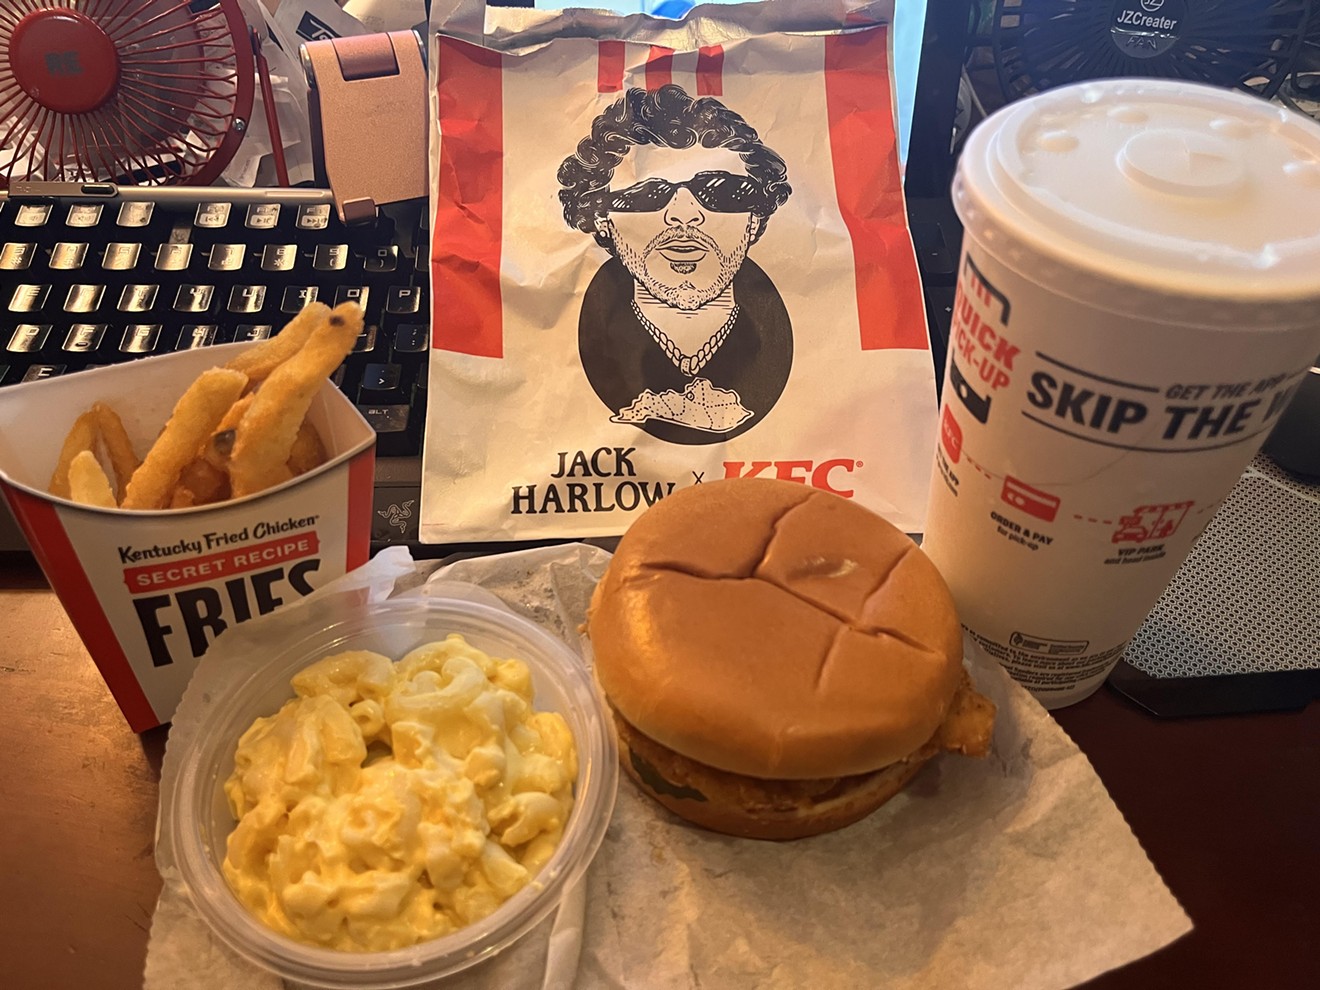 Rapper Jack Harlolw has his own meal at KFC. We just HAD to.